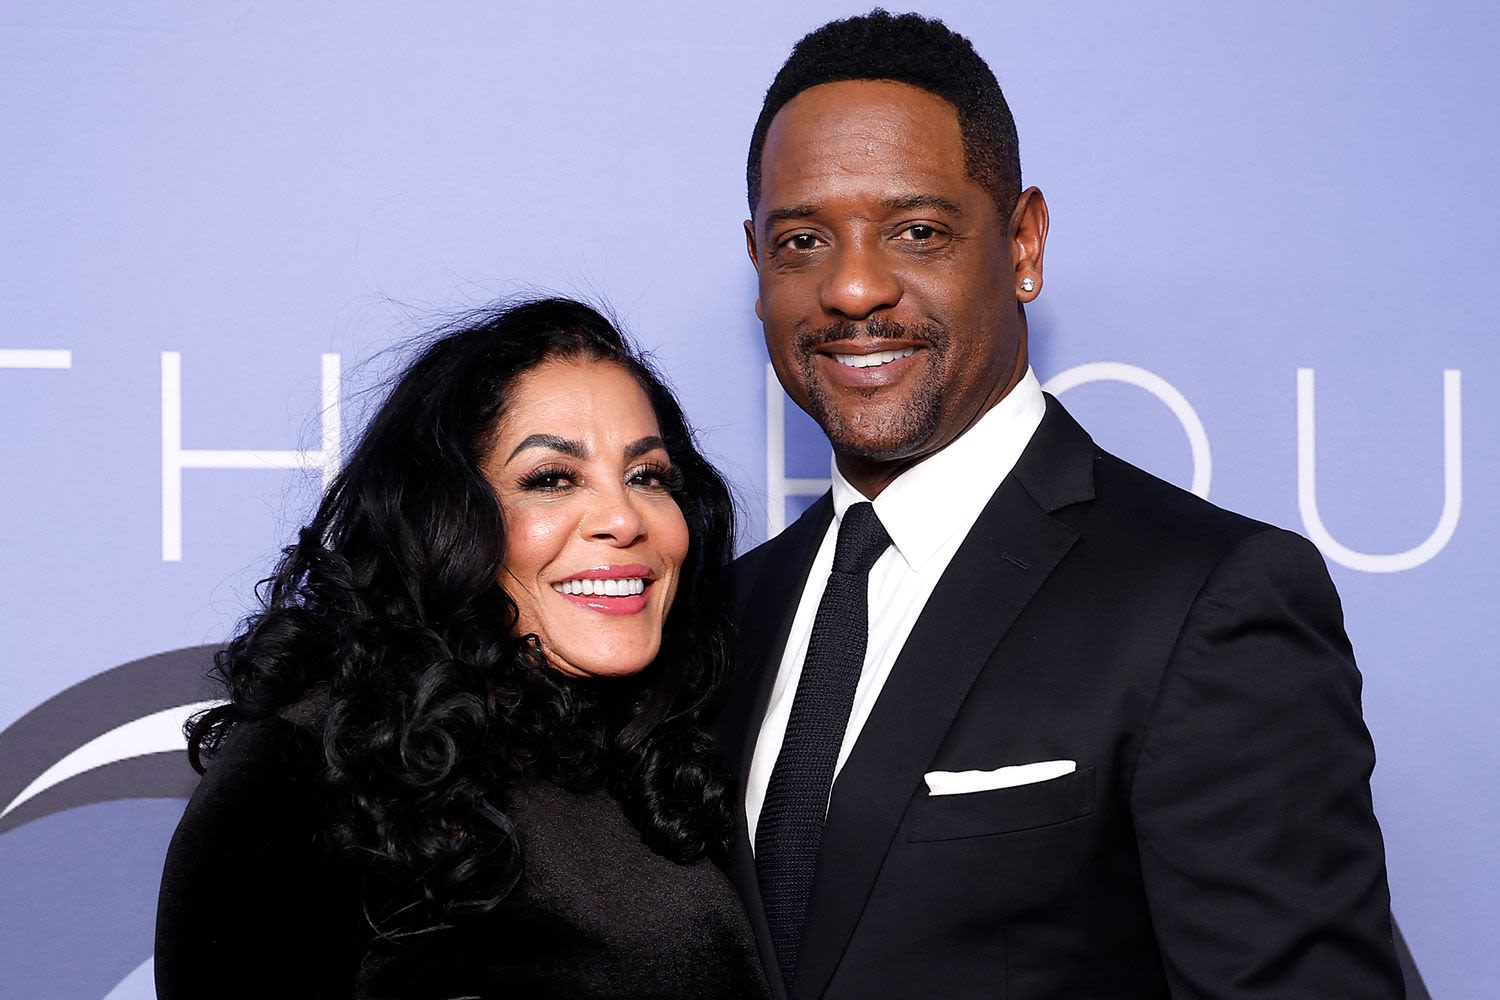 Blair Underwood Reveals the ‘Simple’ Way He and His Wife Josie Hart Celebrated Their 1-Year Wedding Anniversary